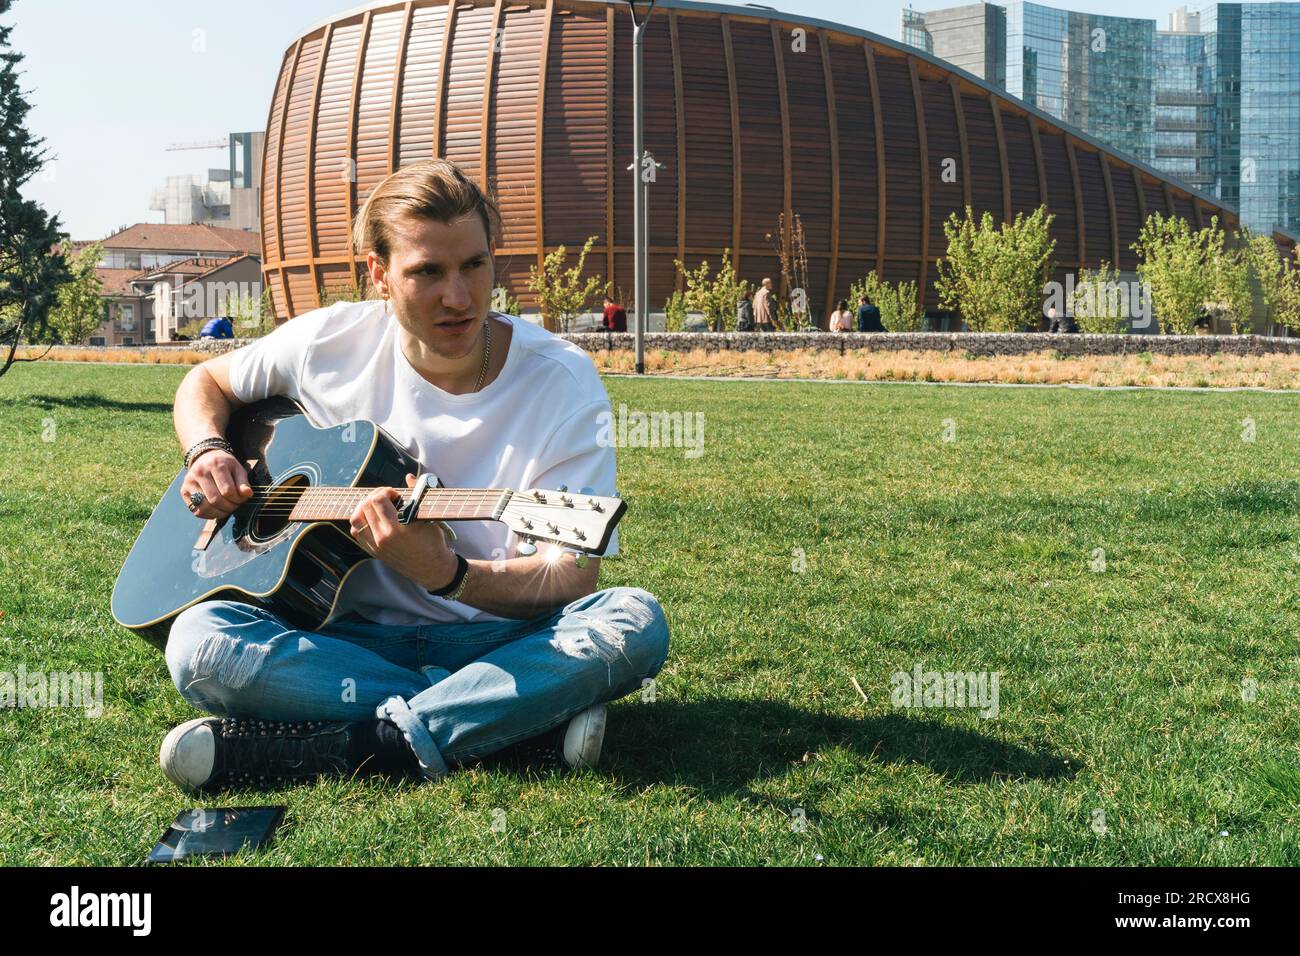 Young singer play the guitar in a urban garden during a sunny day Stock Photo